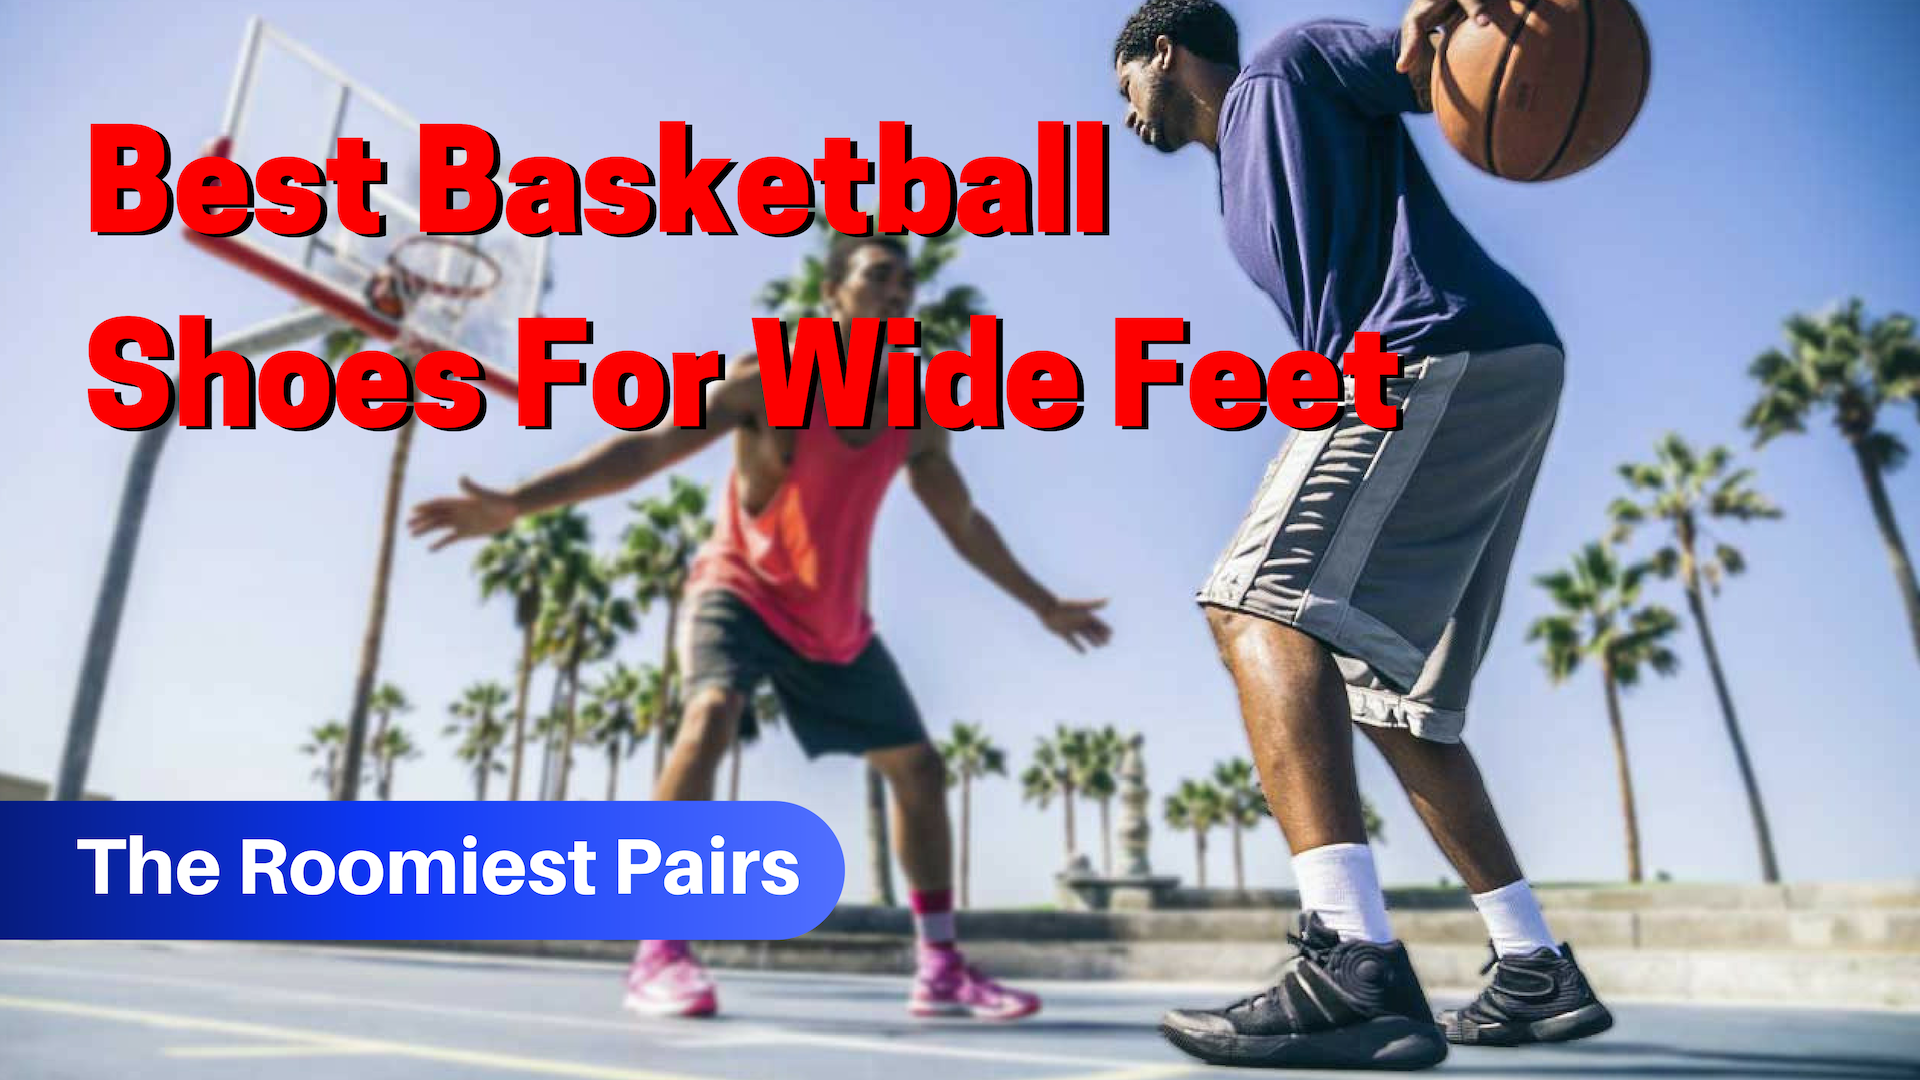 Best Basketball Shoes For Wide Feet 